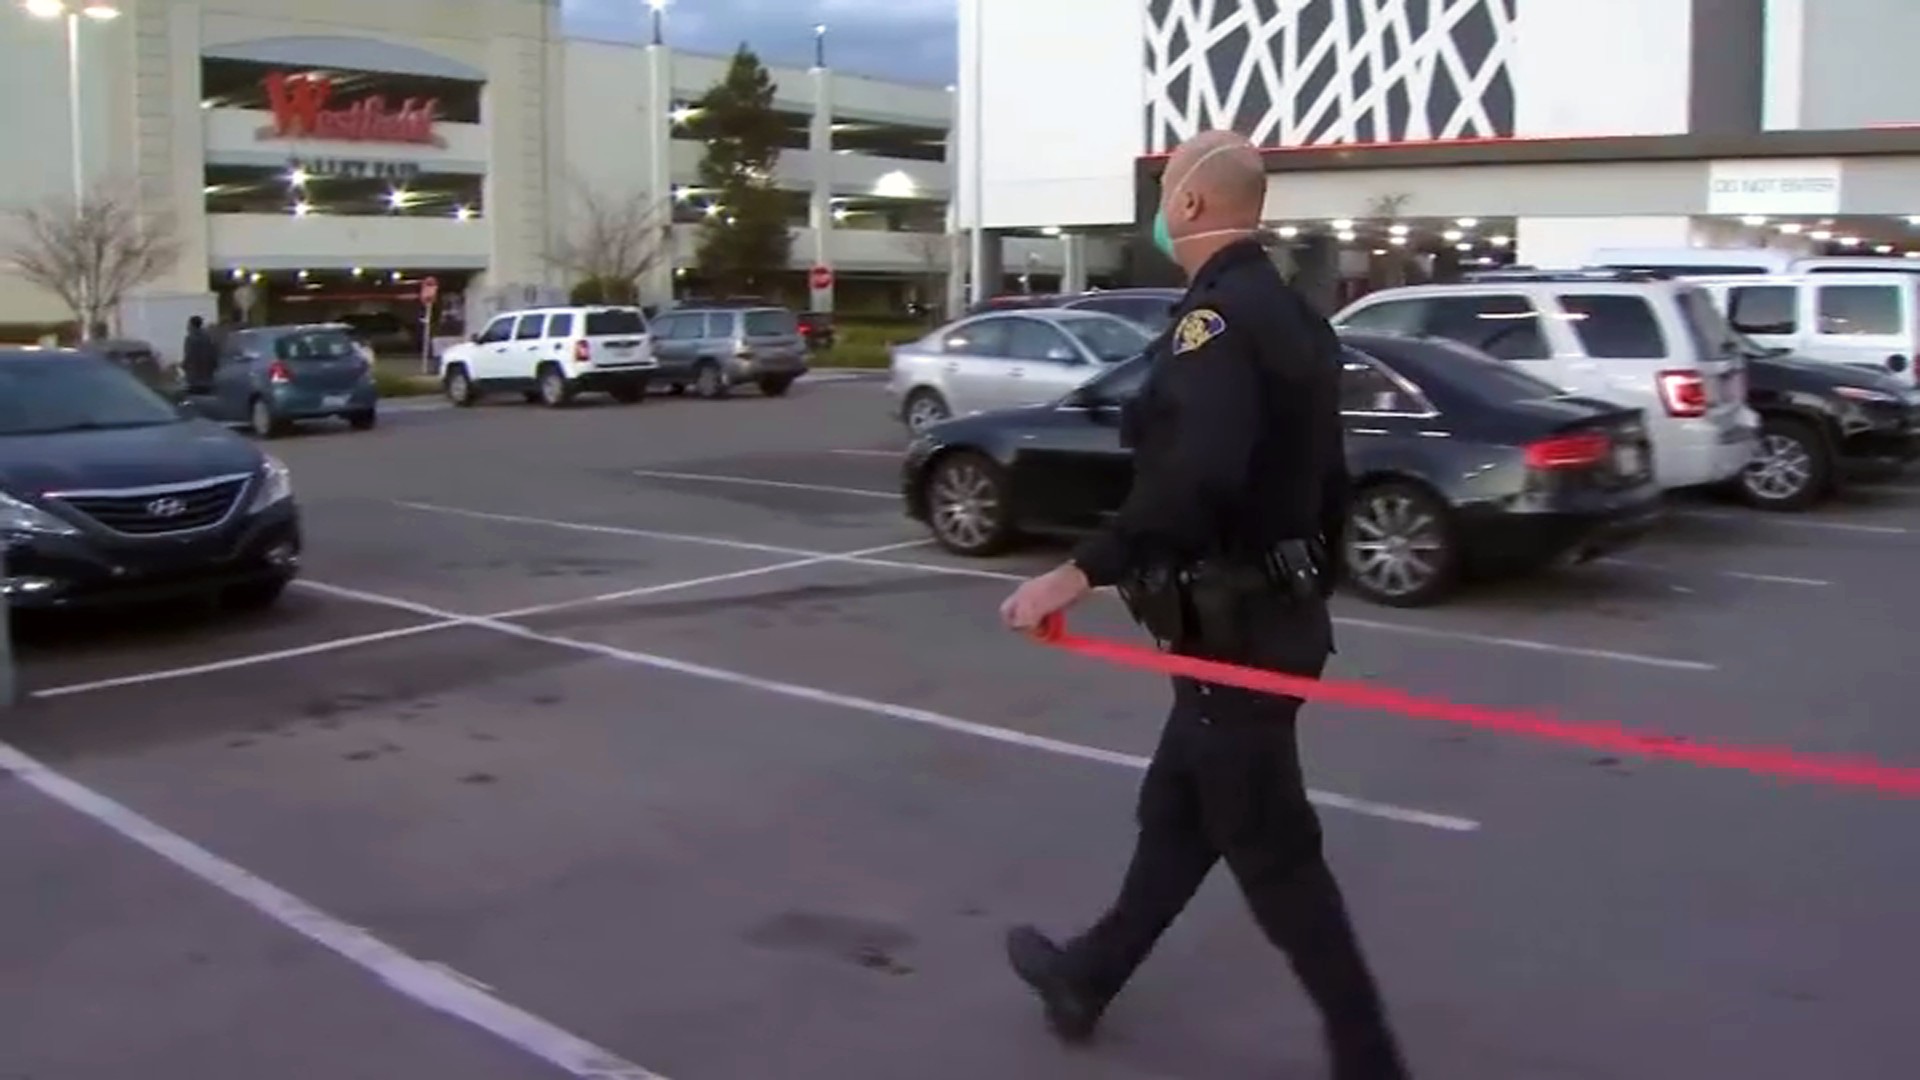 Man arrested after threatening shooting at San Jose Westfield